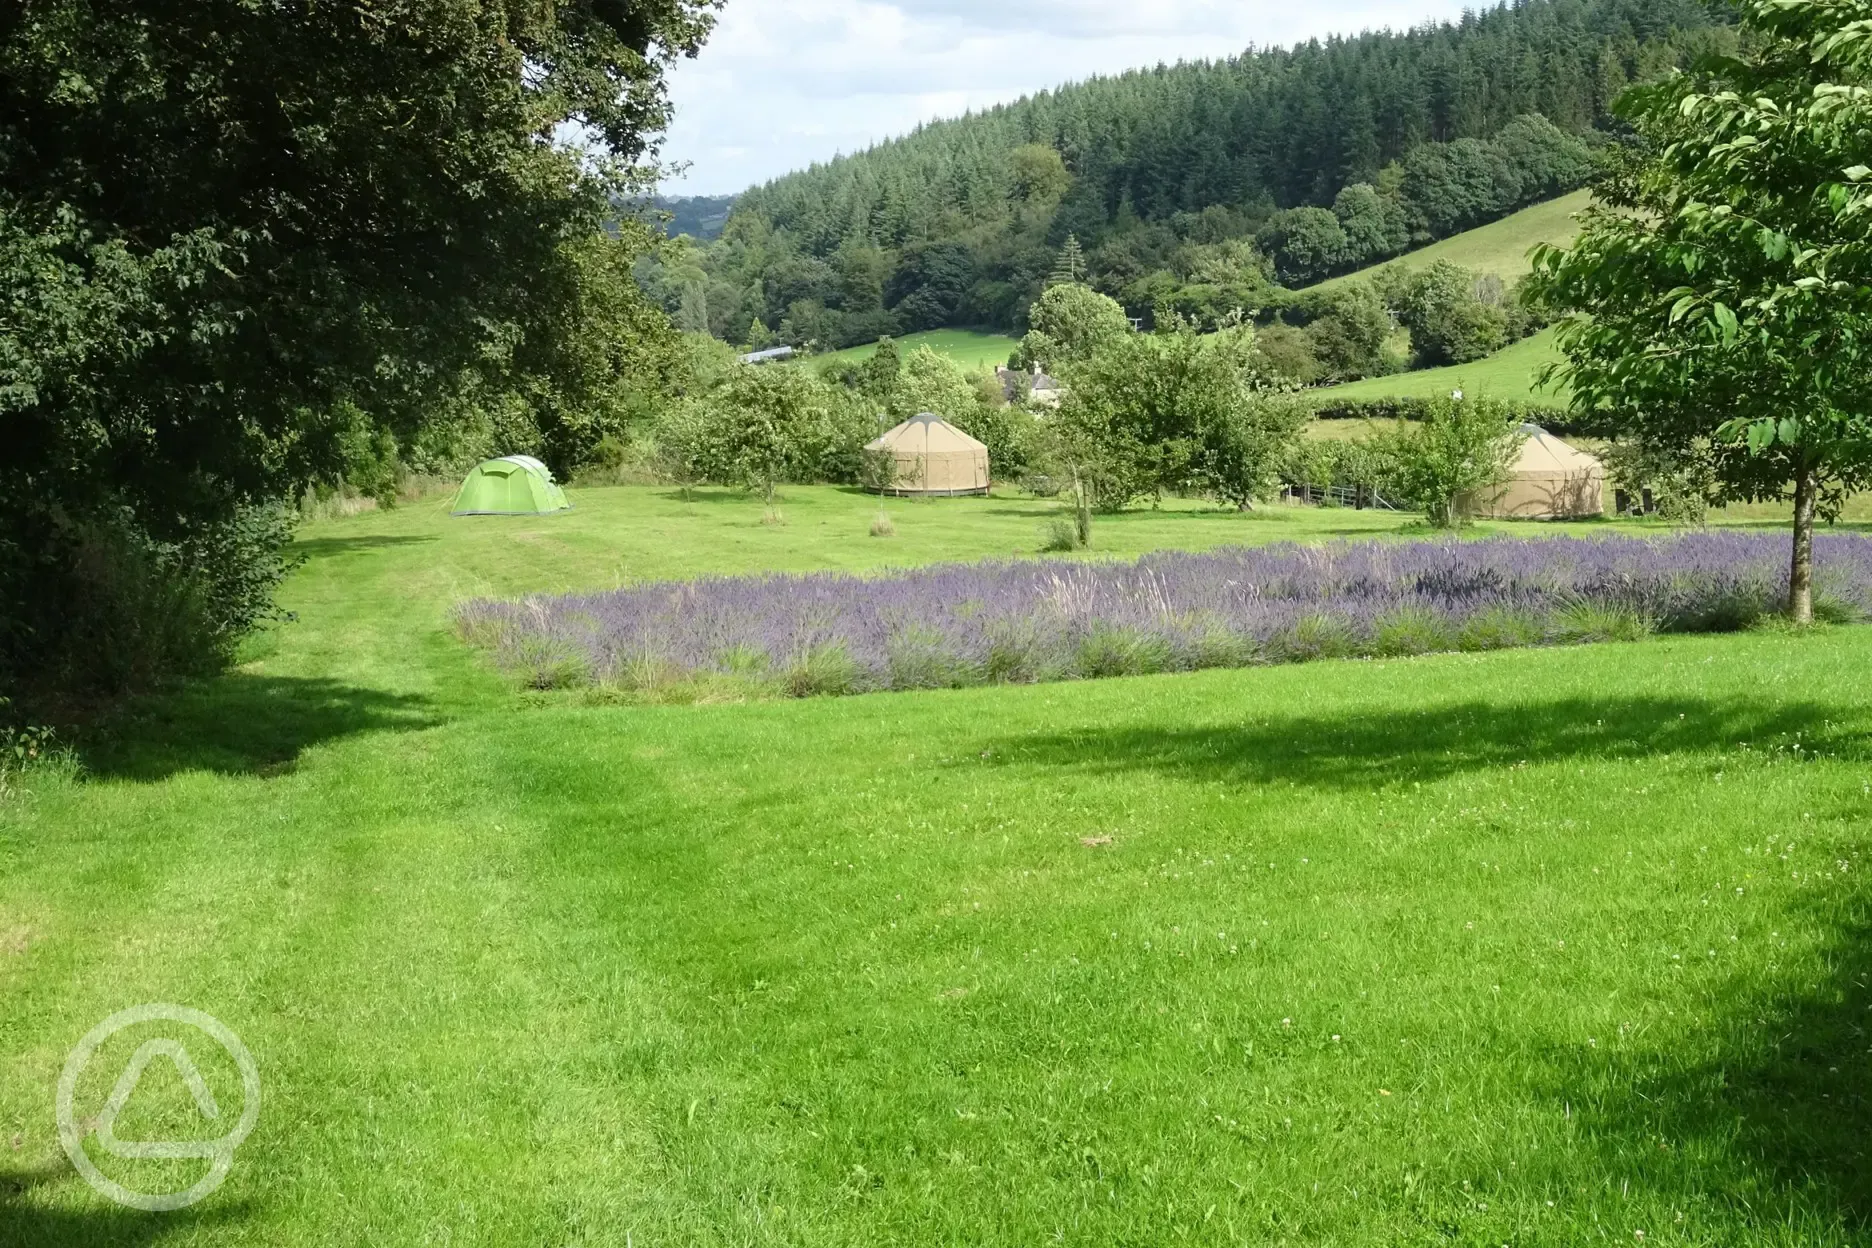 Overview of the site and lavender fields